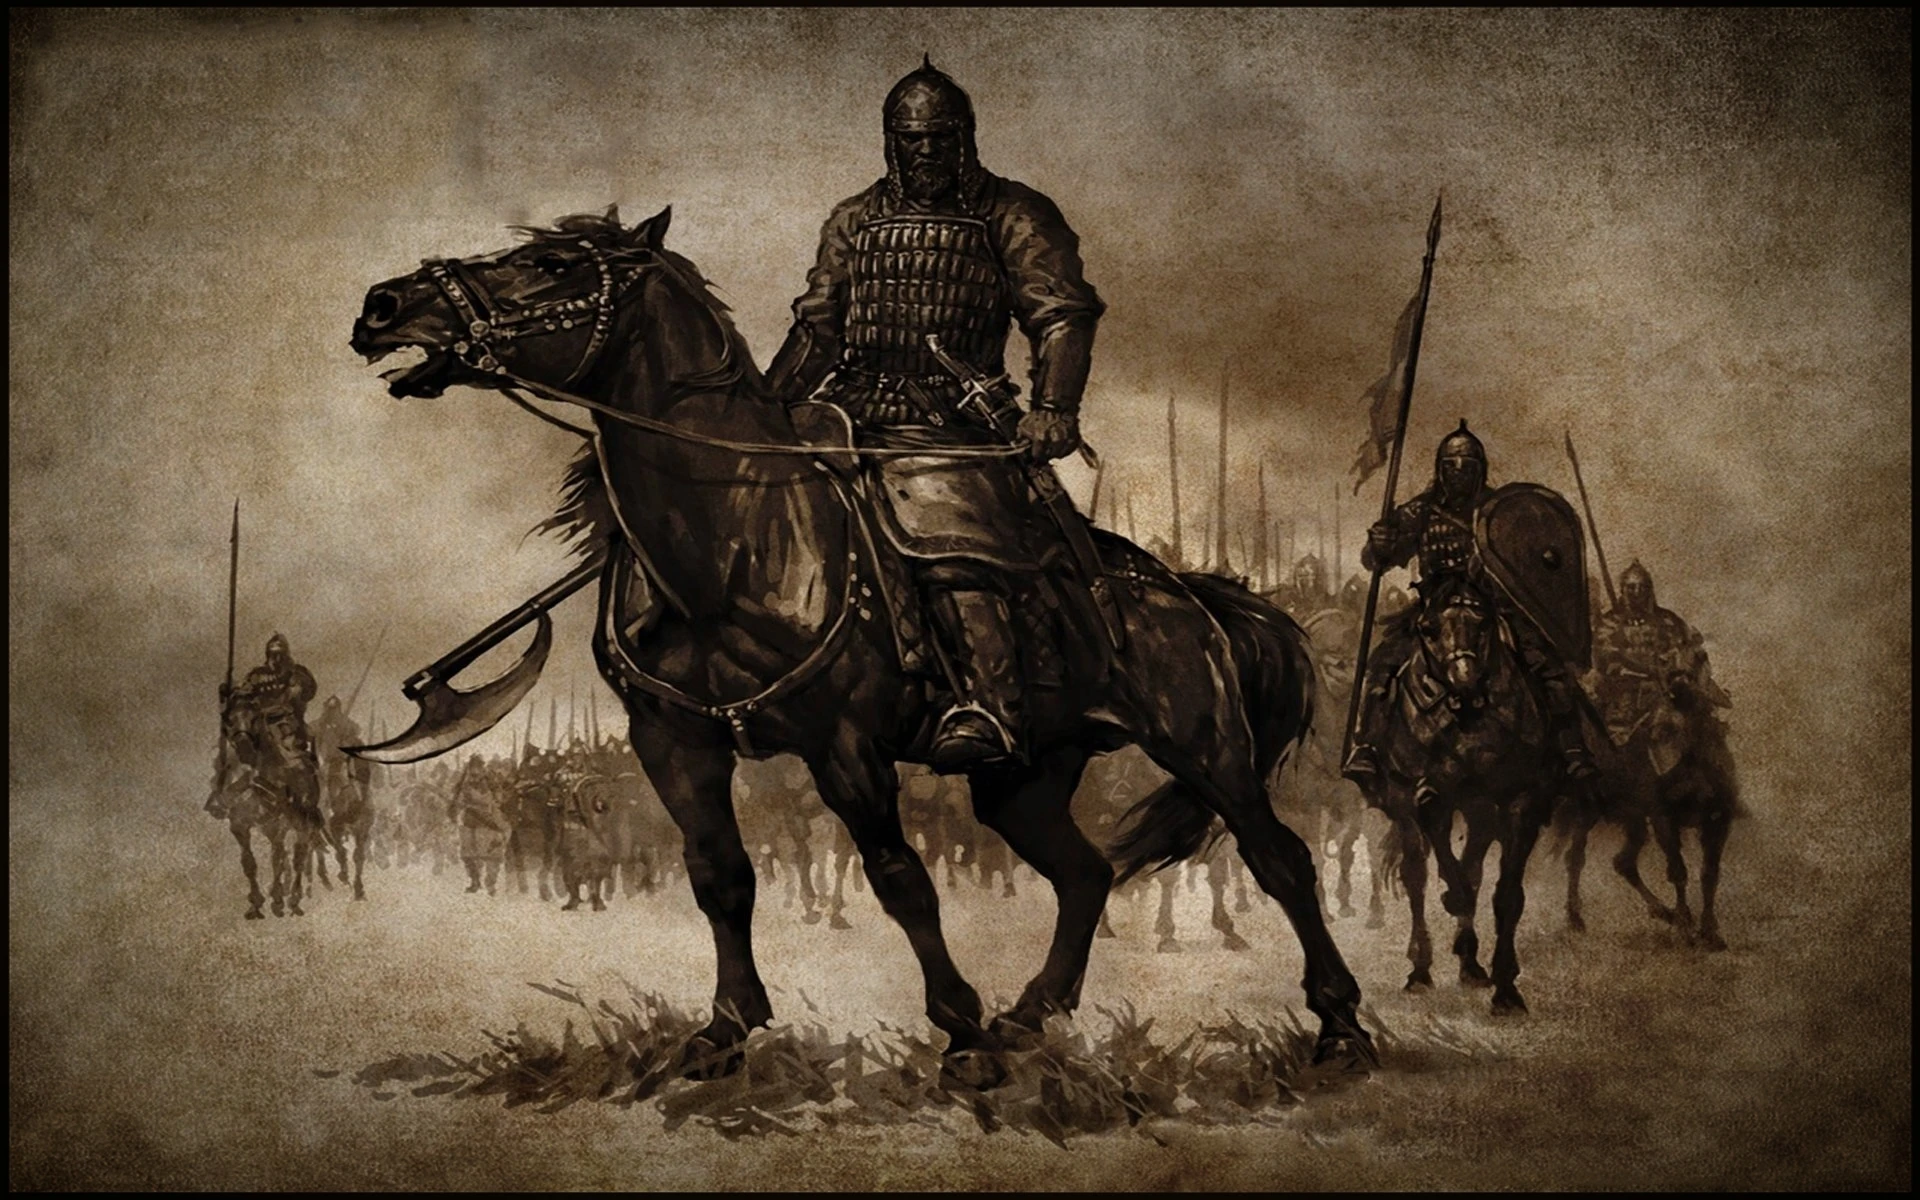 Mount blade 2 bannerlord realistic battle mod